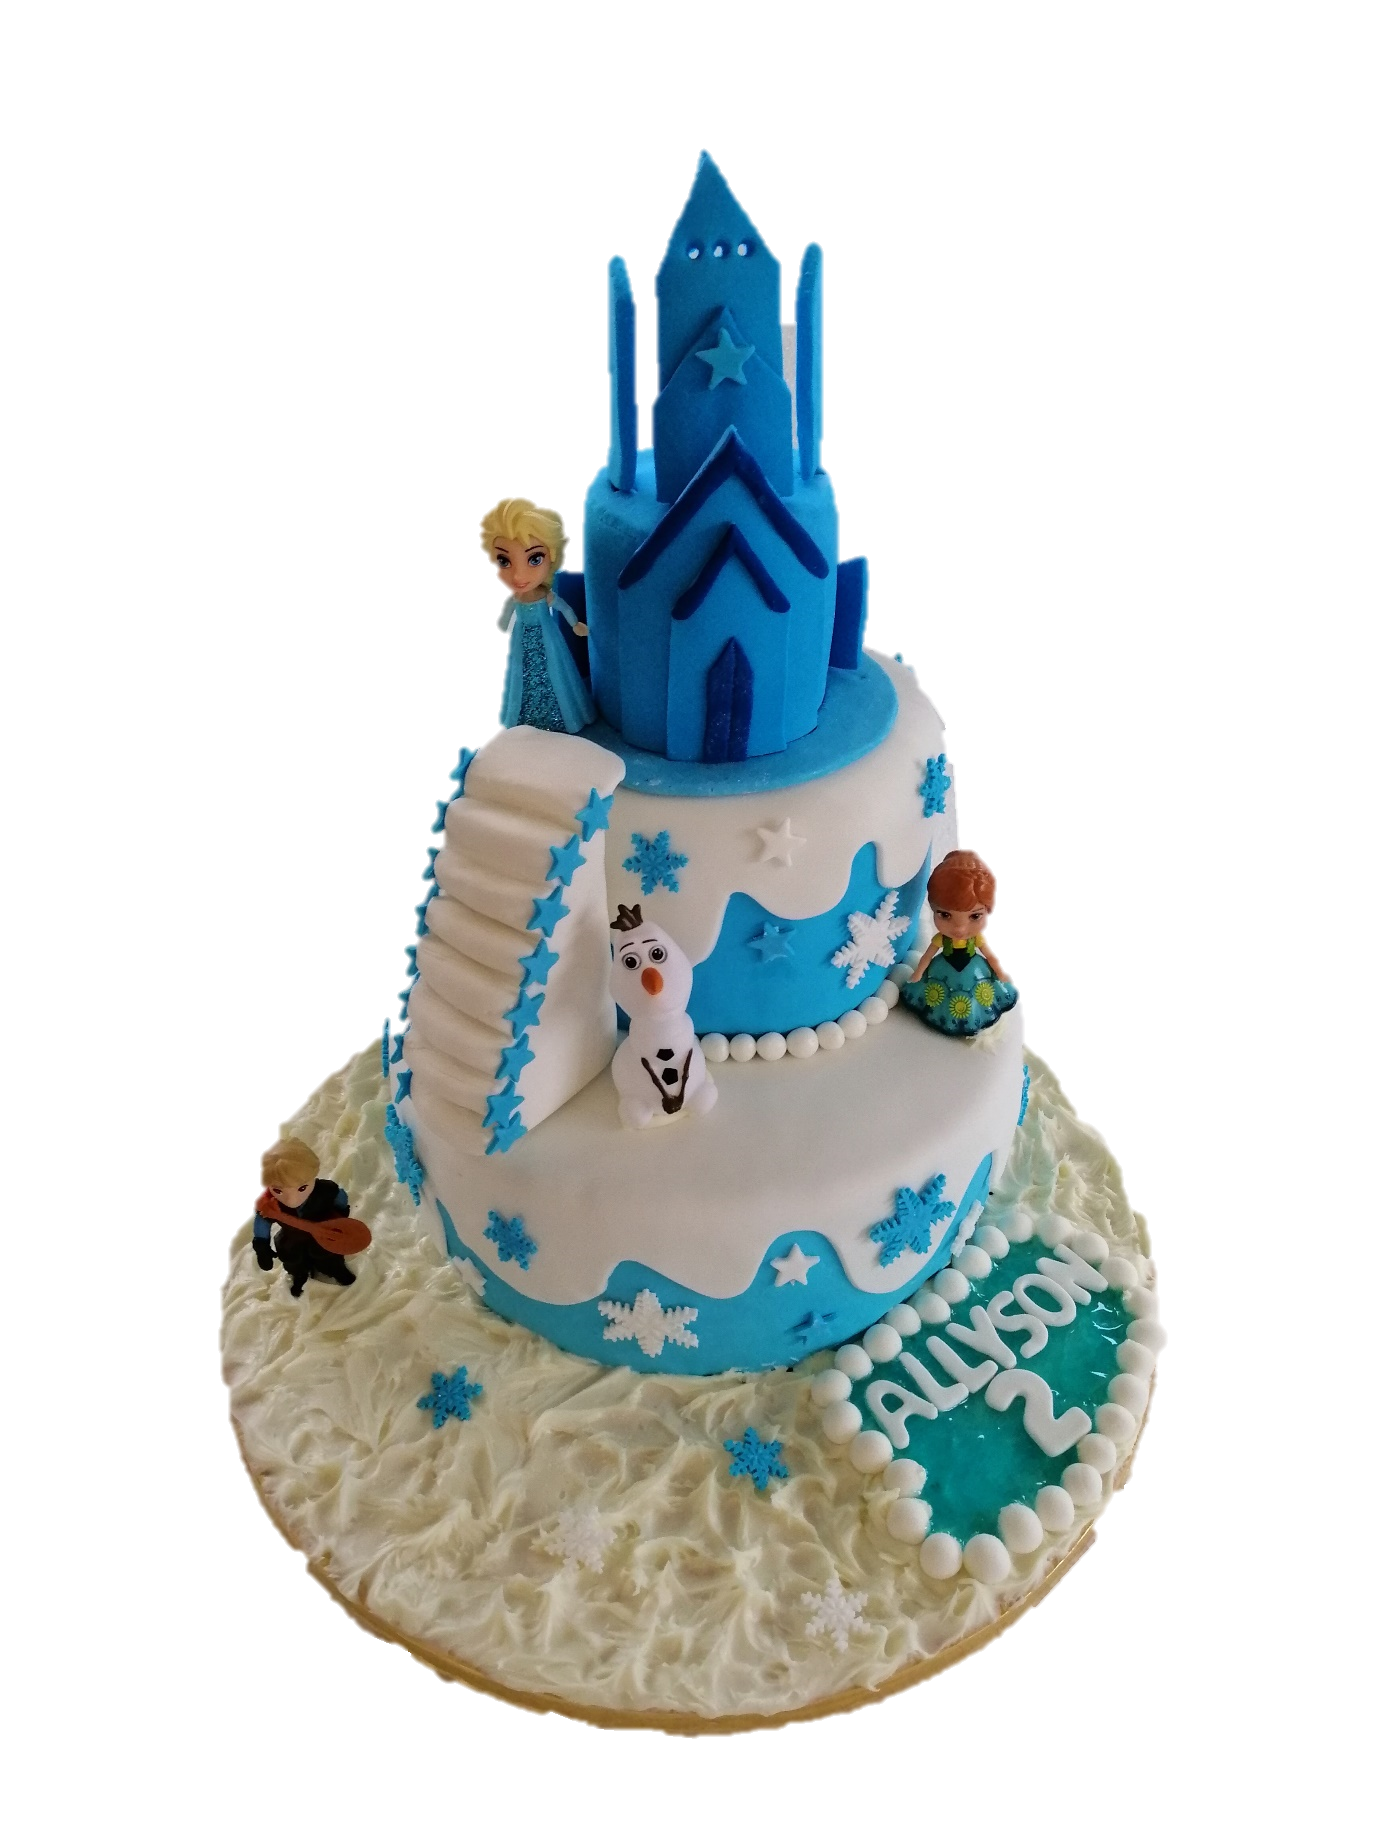 Frozen CAKE TOPPER Elsa Anna Olaf 6 Figure Set Birthday Party Cupcakes  Figurines Disney * FAST Shipping * Toy Doll Set